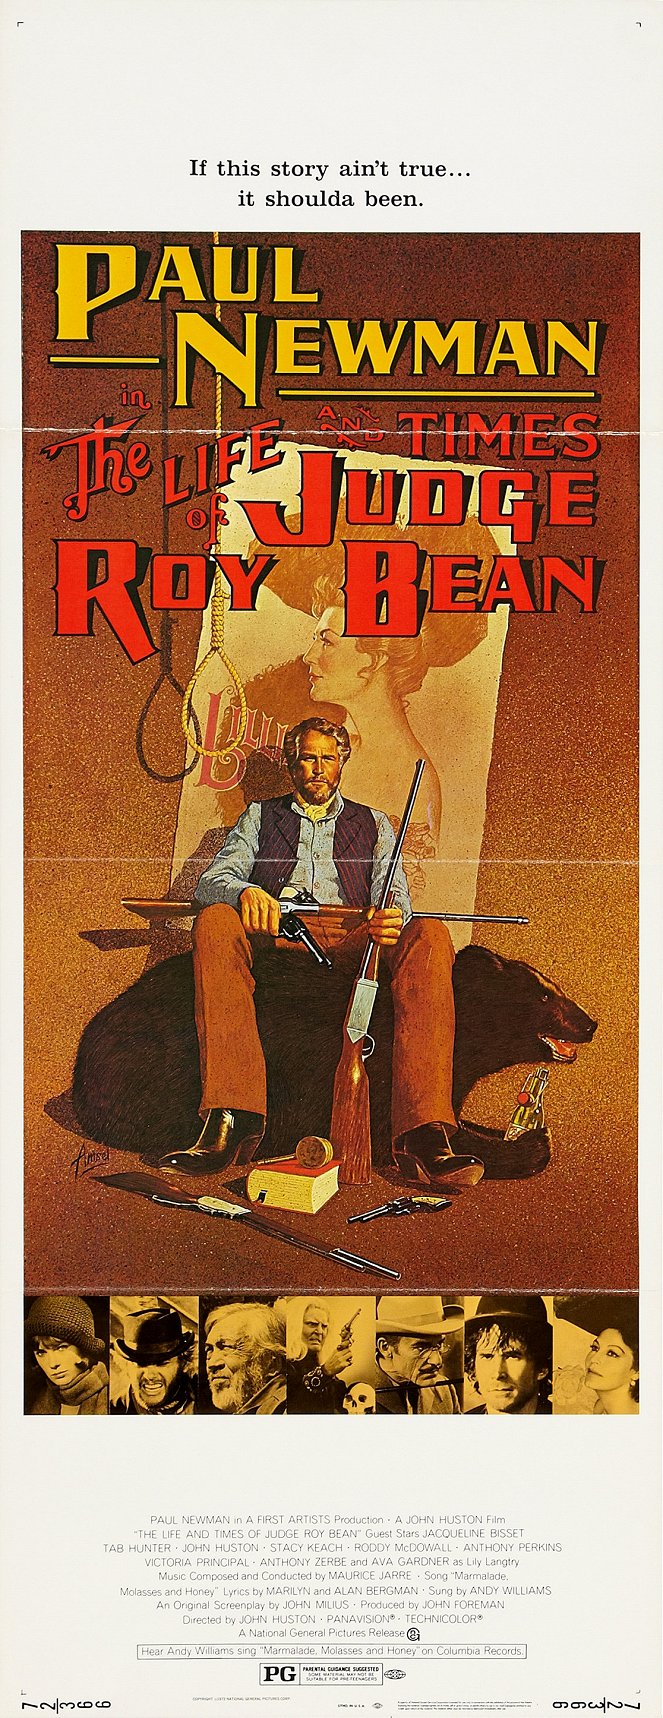 The Life and Times of Judge Roy Bean - Posters